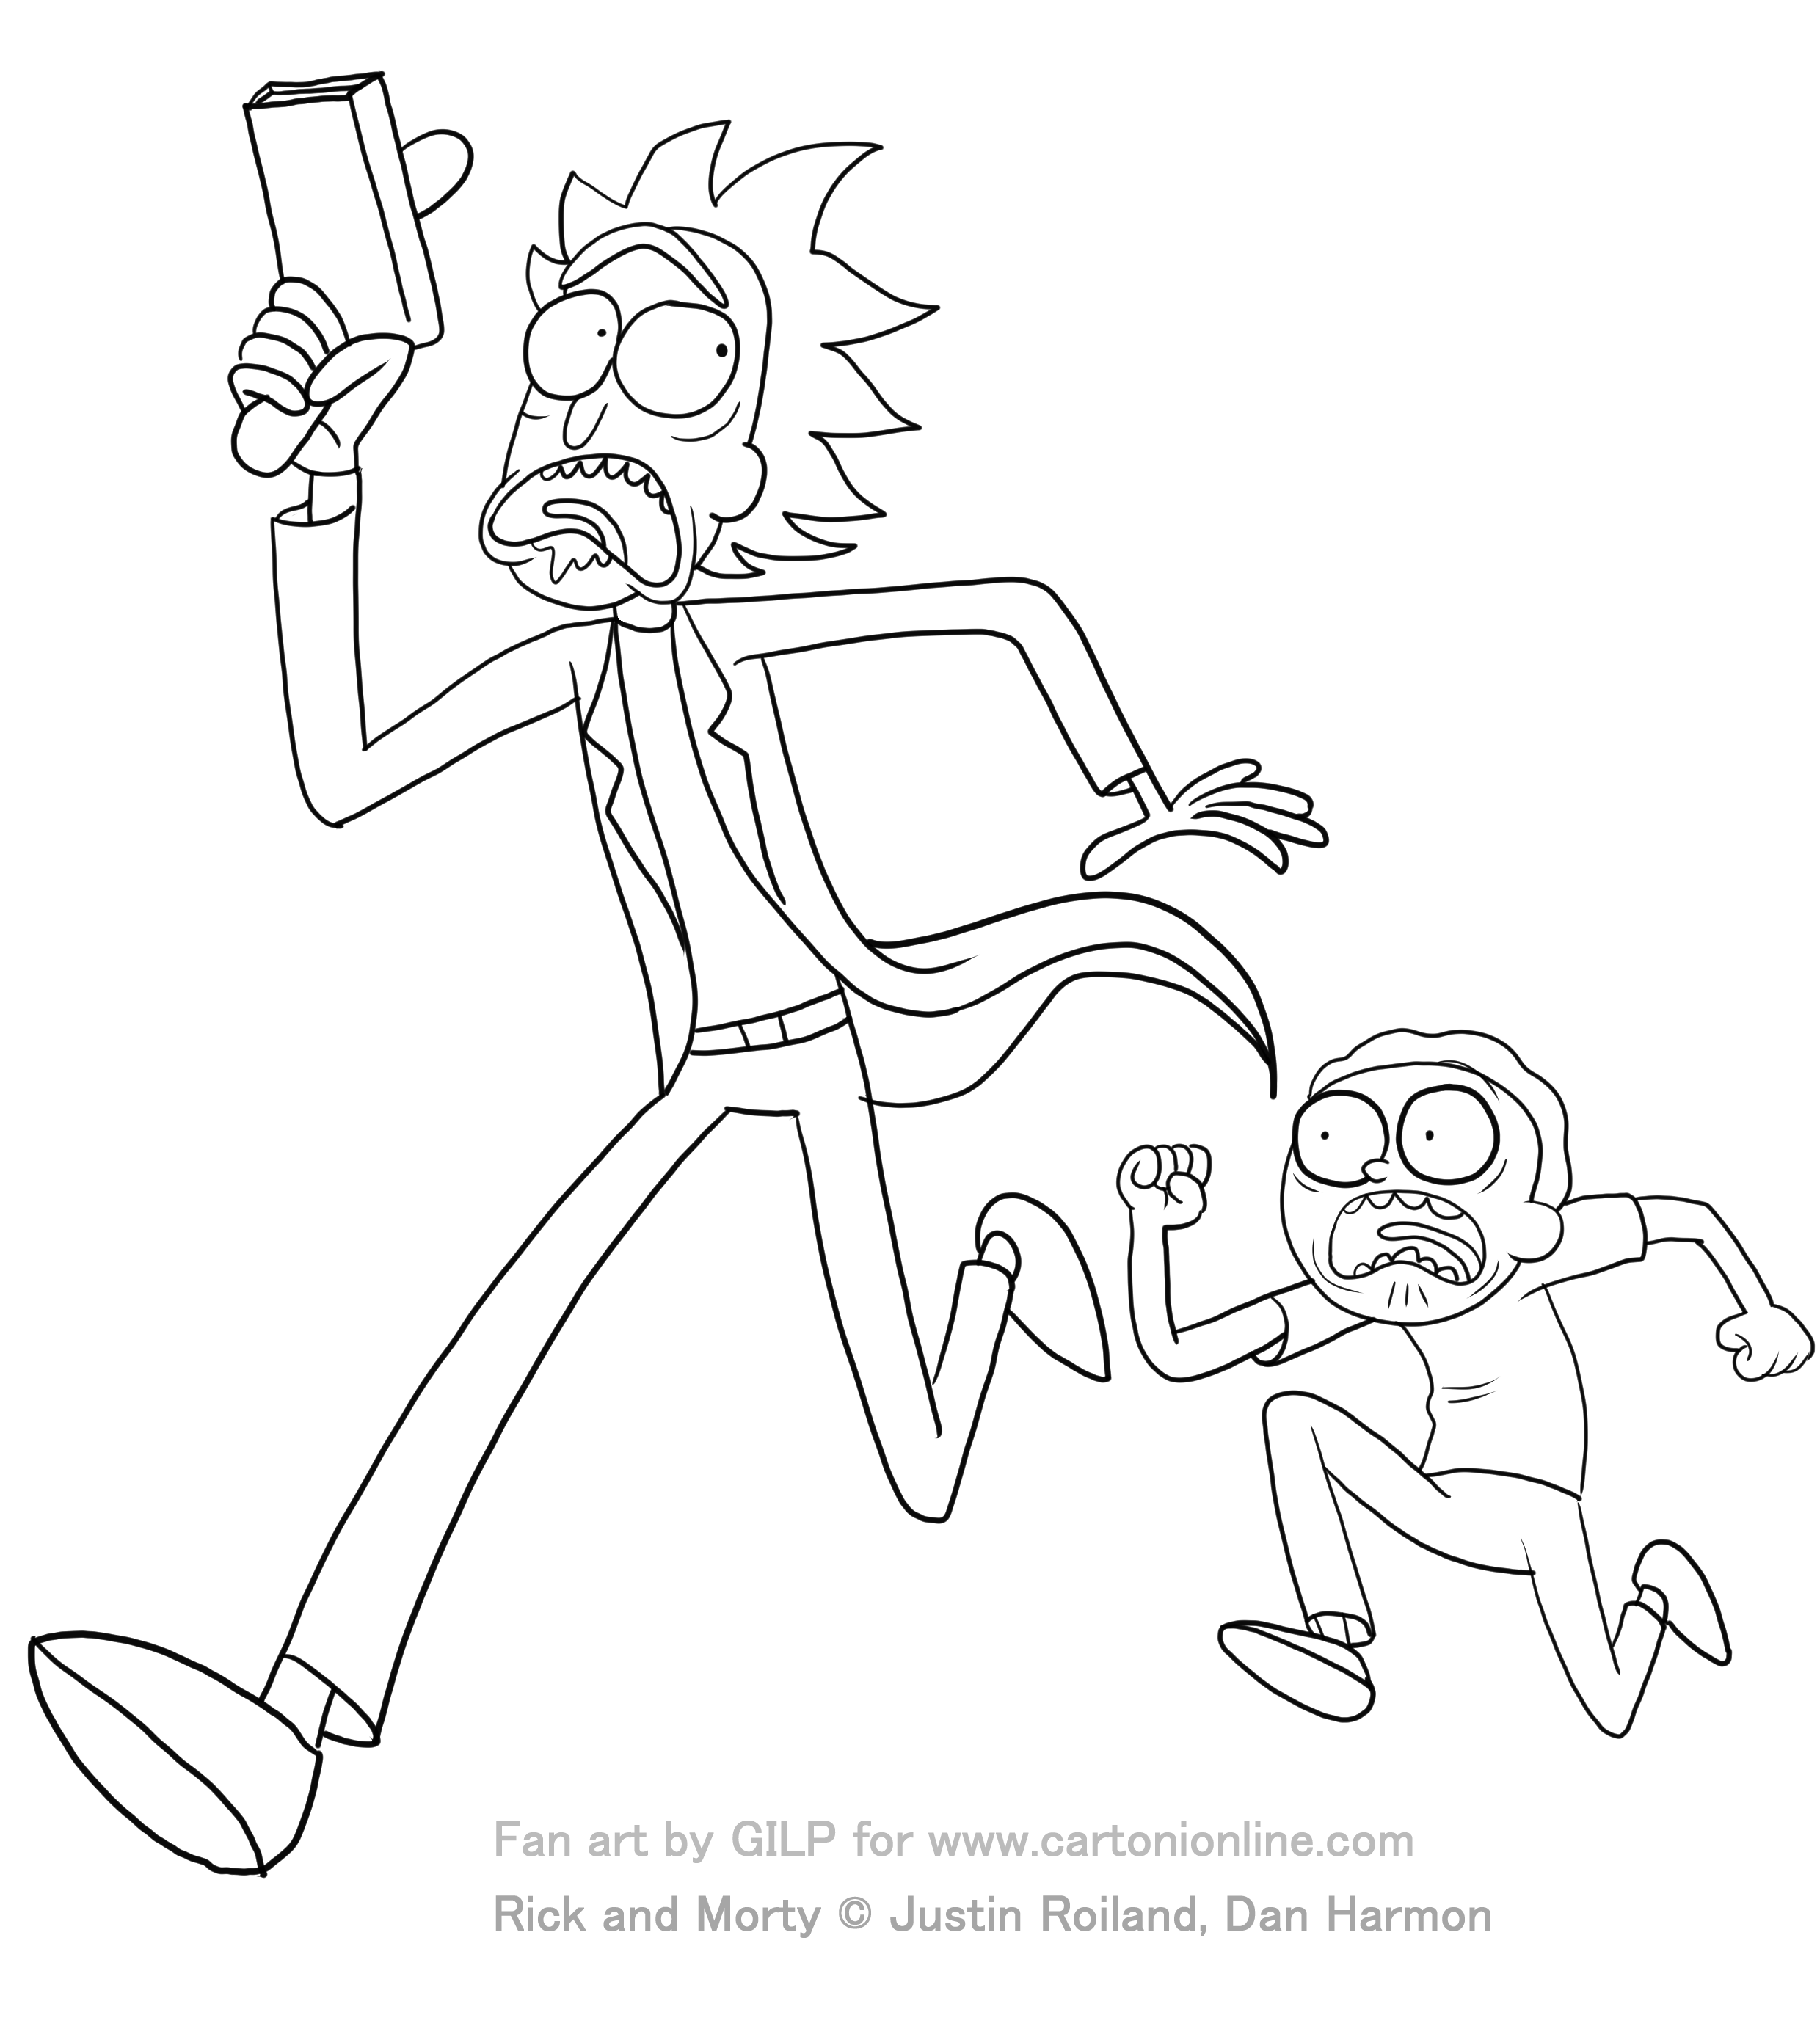 Rick and Morty 01 from Rick and Morty coloring page to print and coloring